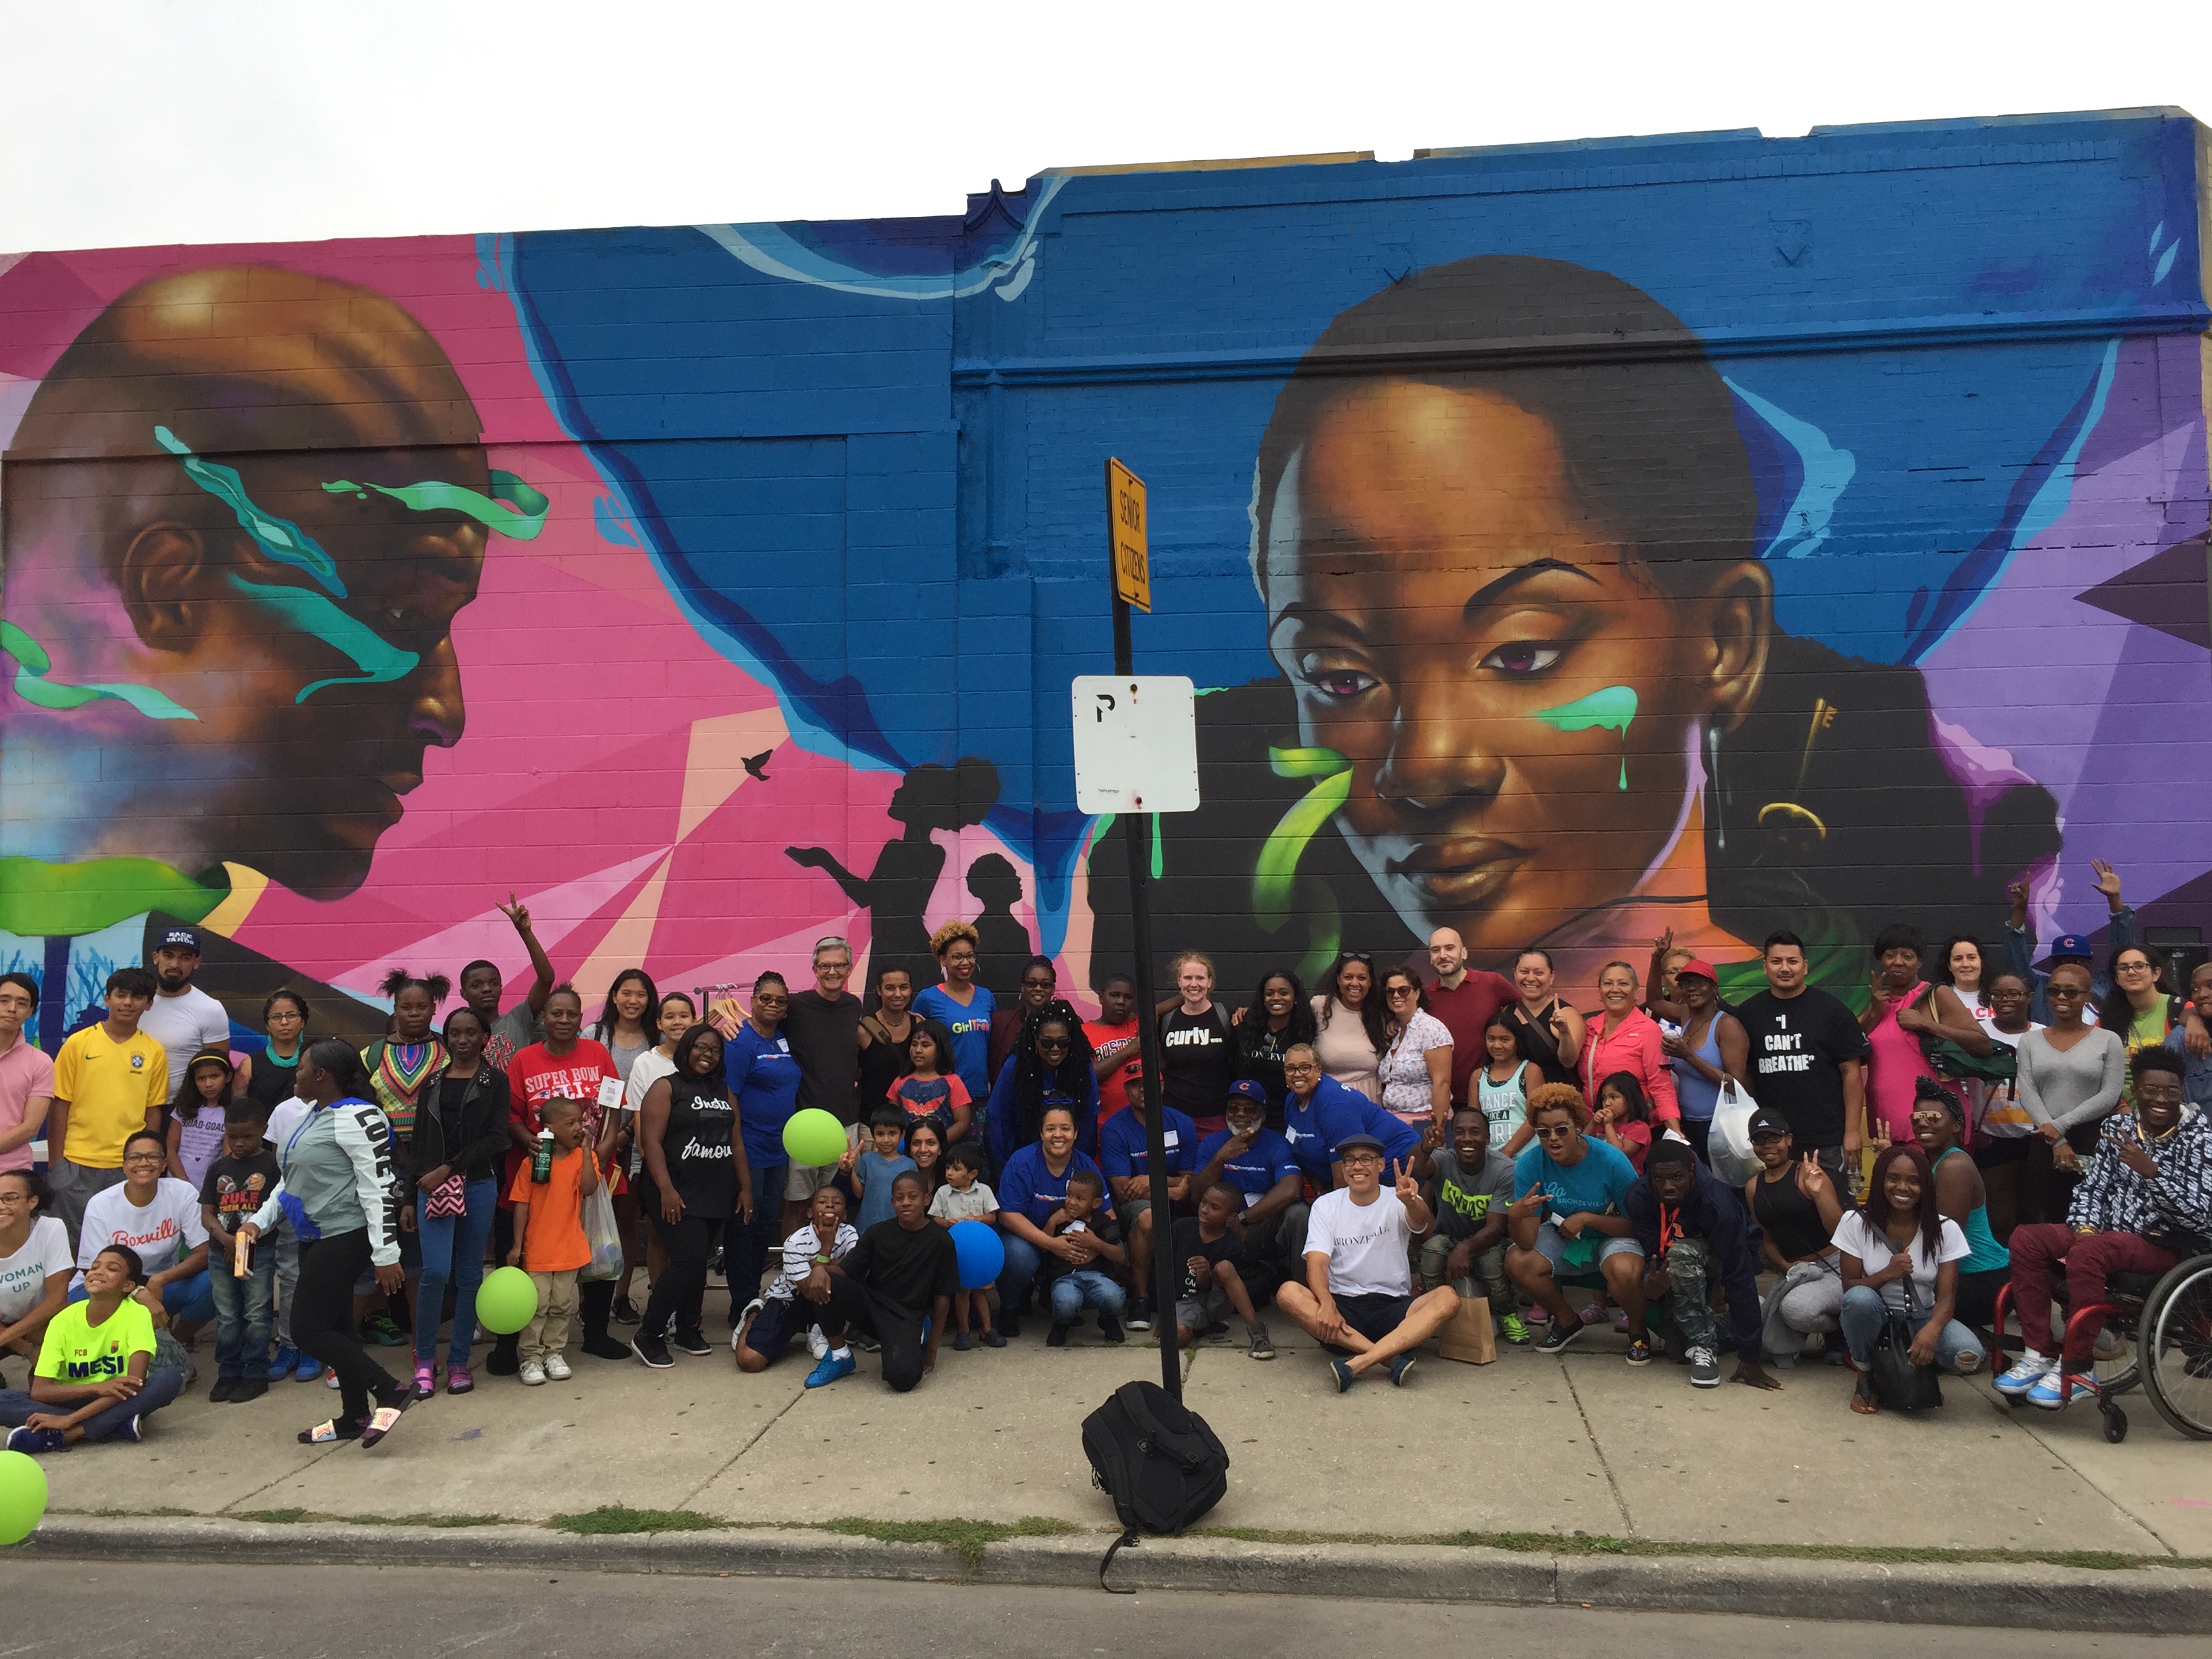 A large group on a sidewalk in front of a mural of a man and woman's faces